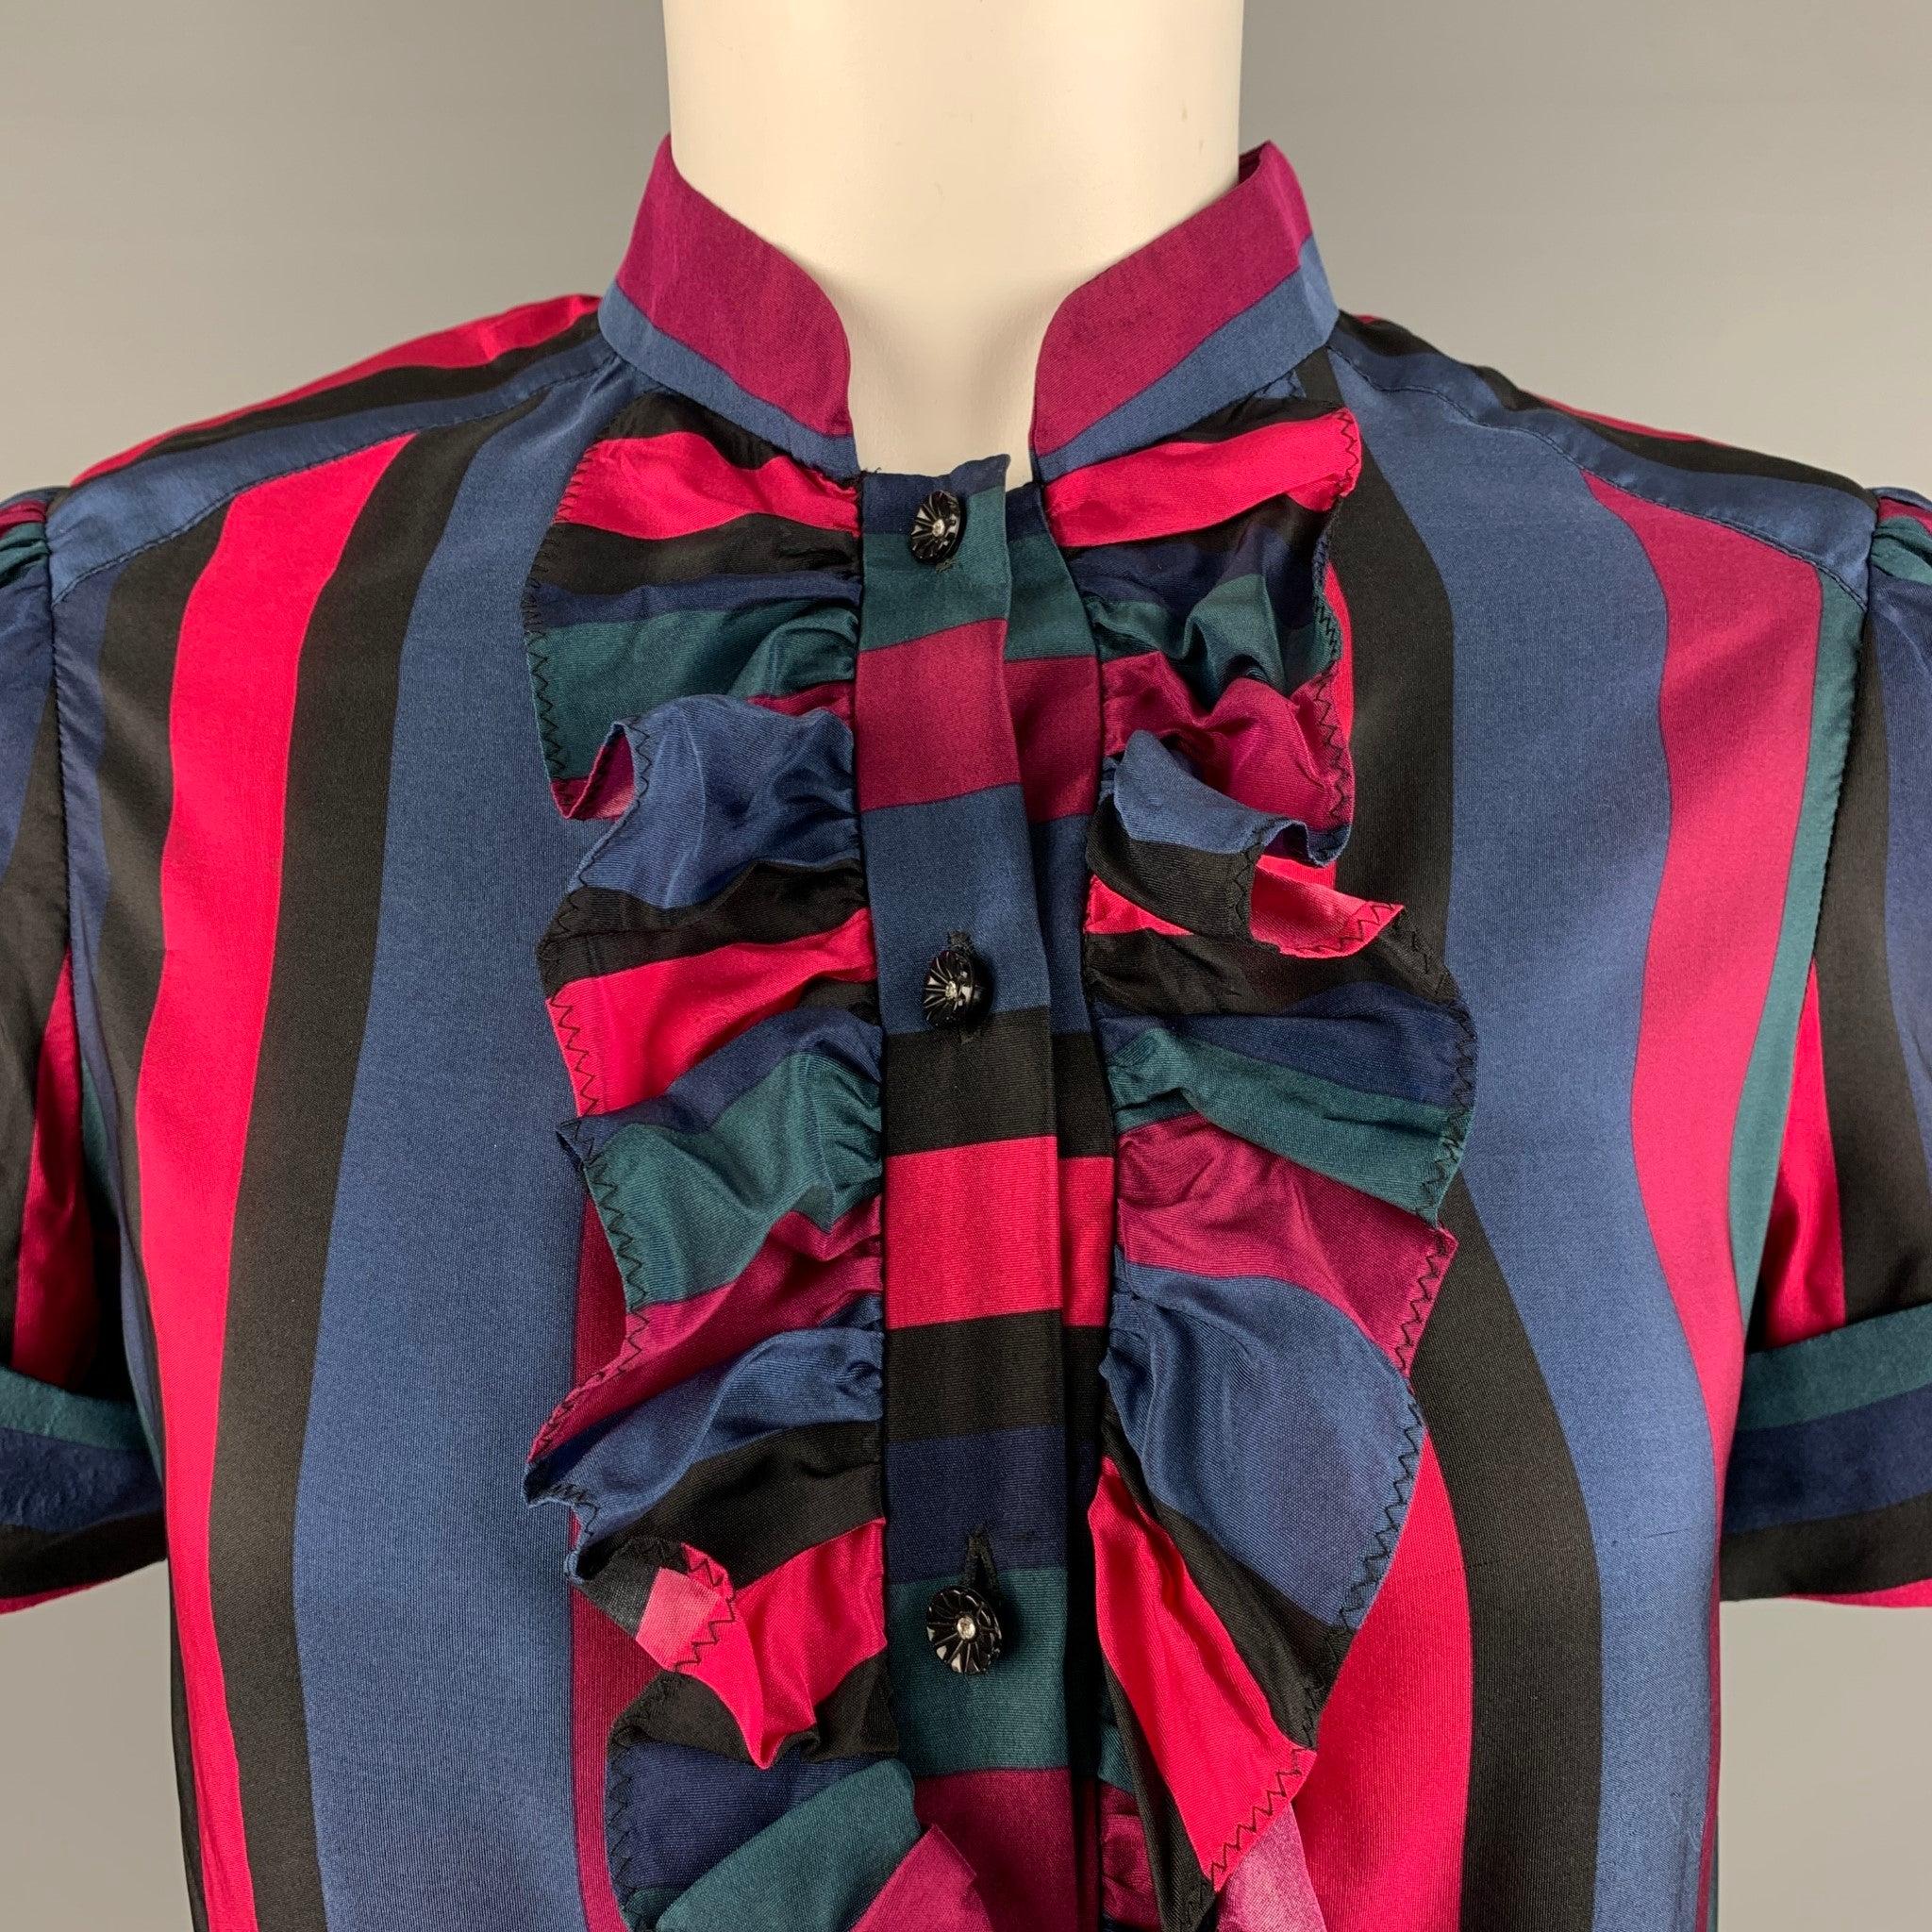 MARC by MARC JACOBS short sleeve shirt in a multi-color rayon silk blend fabric featuring ruffle front, stripe pattern, cuffed short sleeves, flower button detailing, and a button closure. Good Pre-Owned Condition. Moderate signs of wear. As-Is.